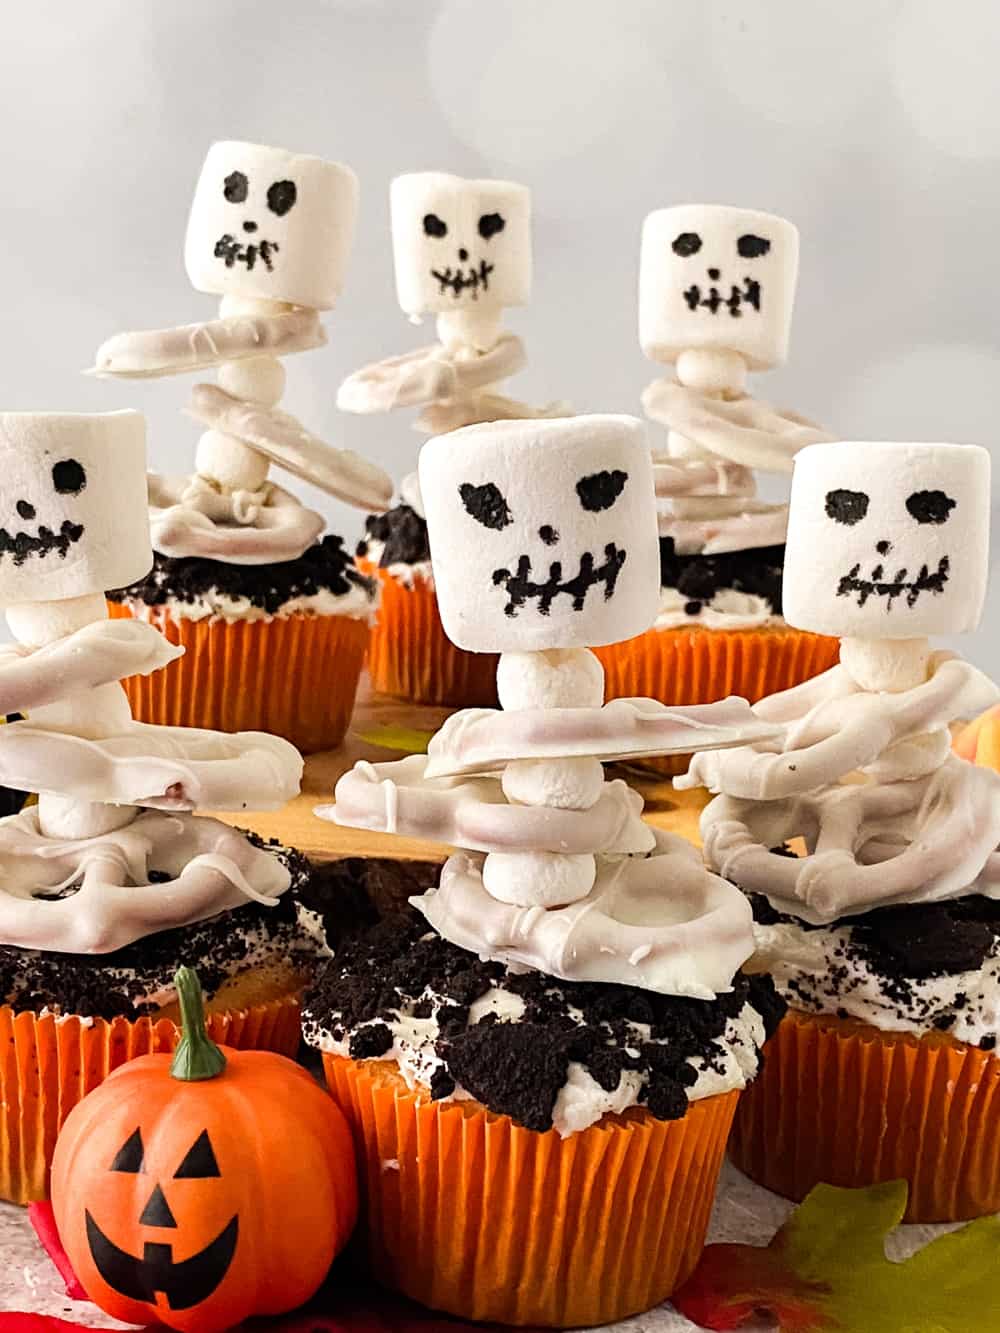 Get Your Spook On with Skeleton Cupcakes